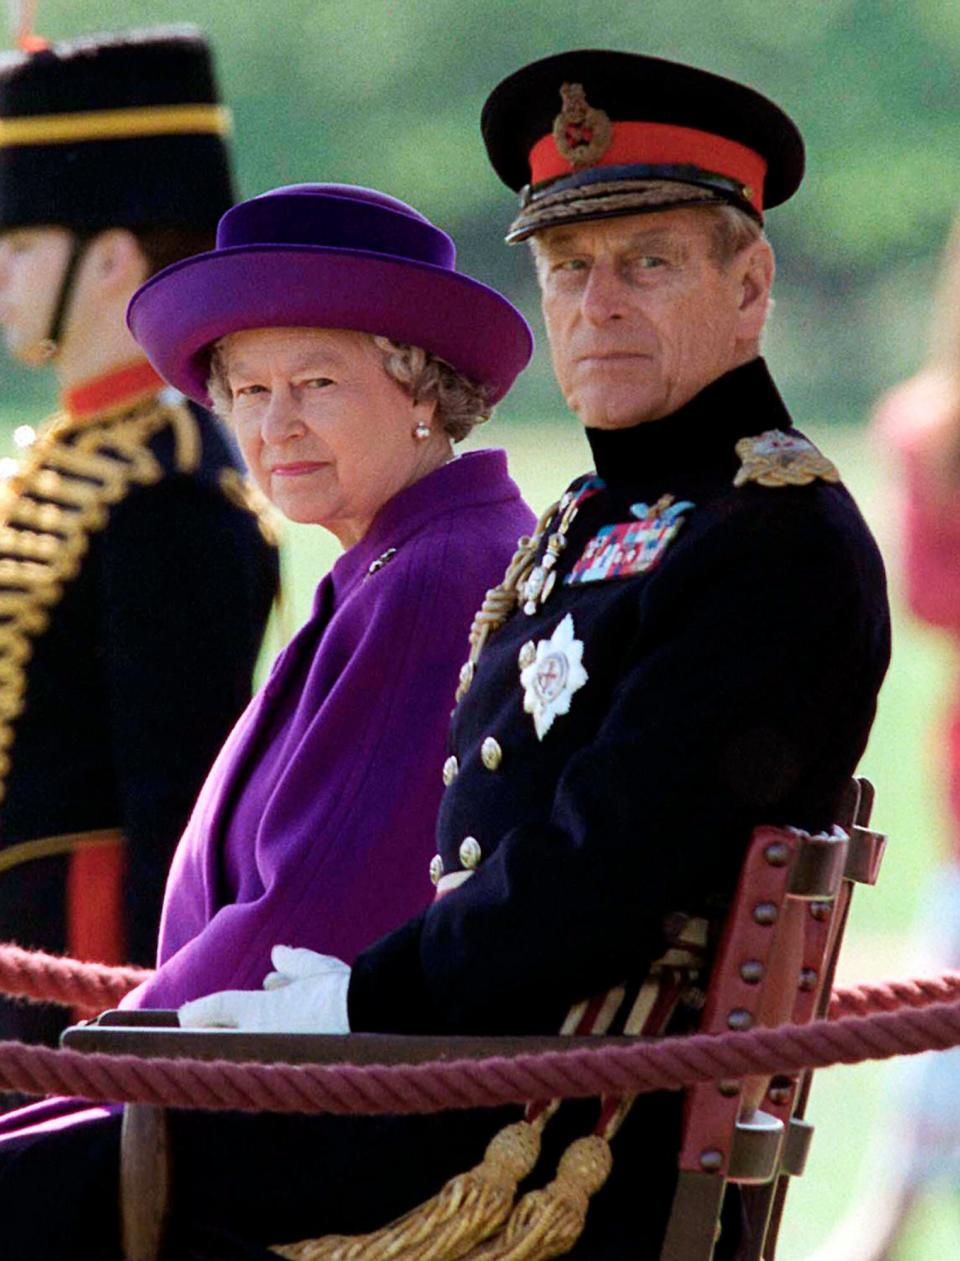 The Queen And Prince Philip Review The King's Troop At A Special Parade To Mark Their Jubilee In Regent's Park